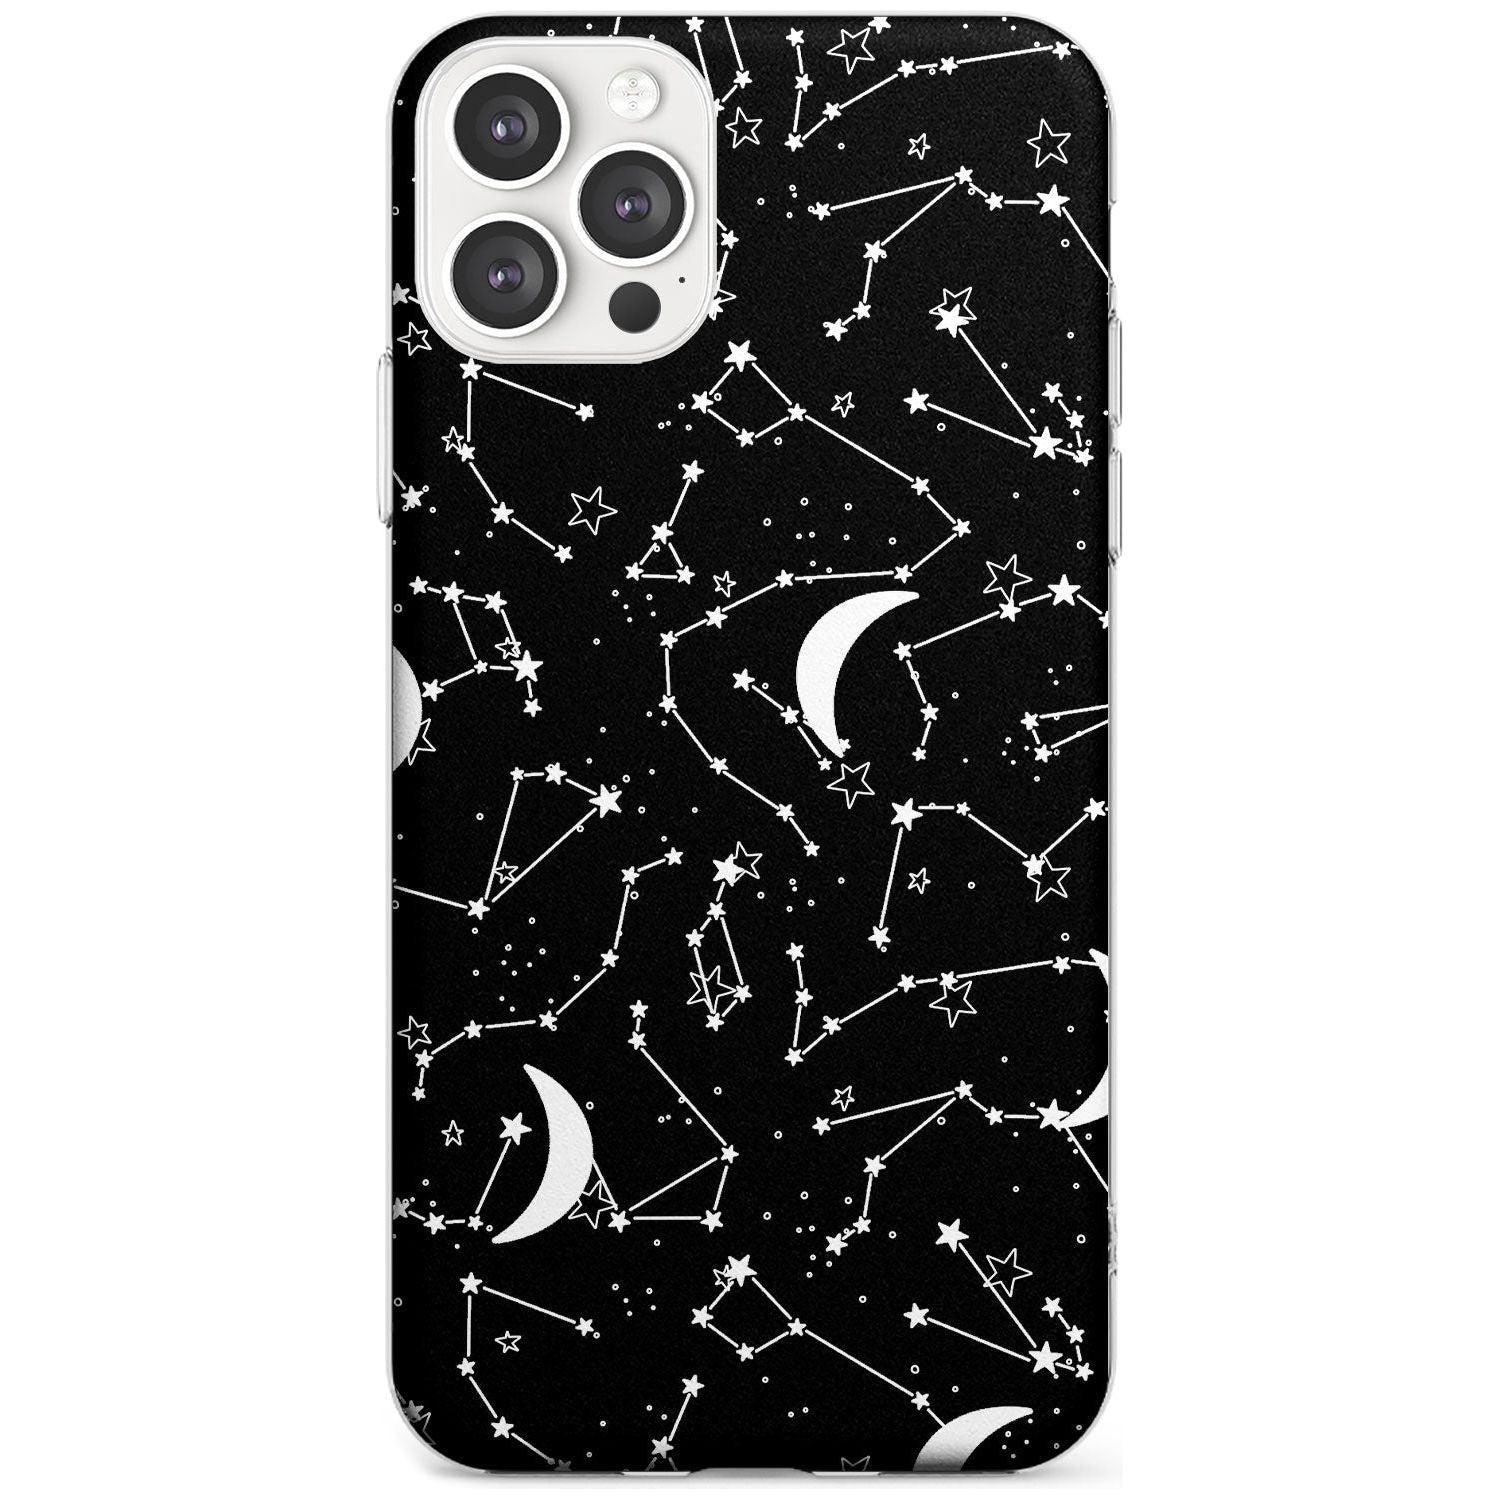 White Constellations on Black Black Impact Phone Case for iPhone 11 Pro Max